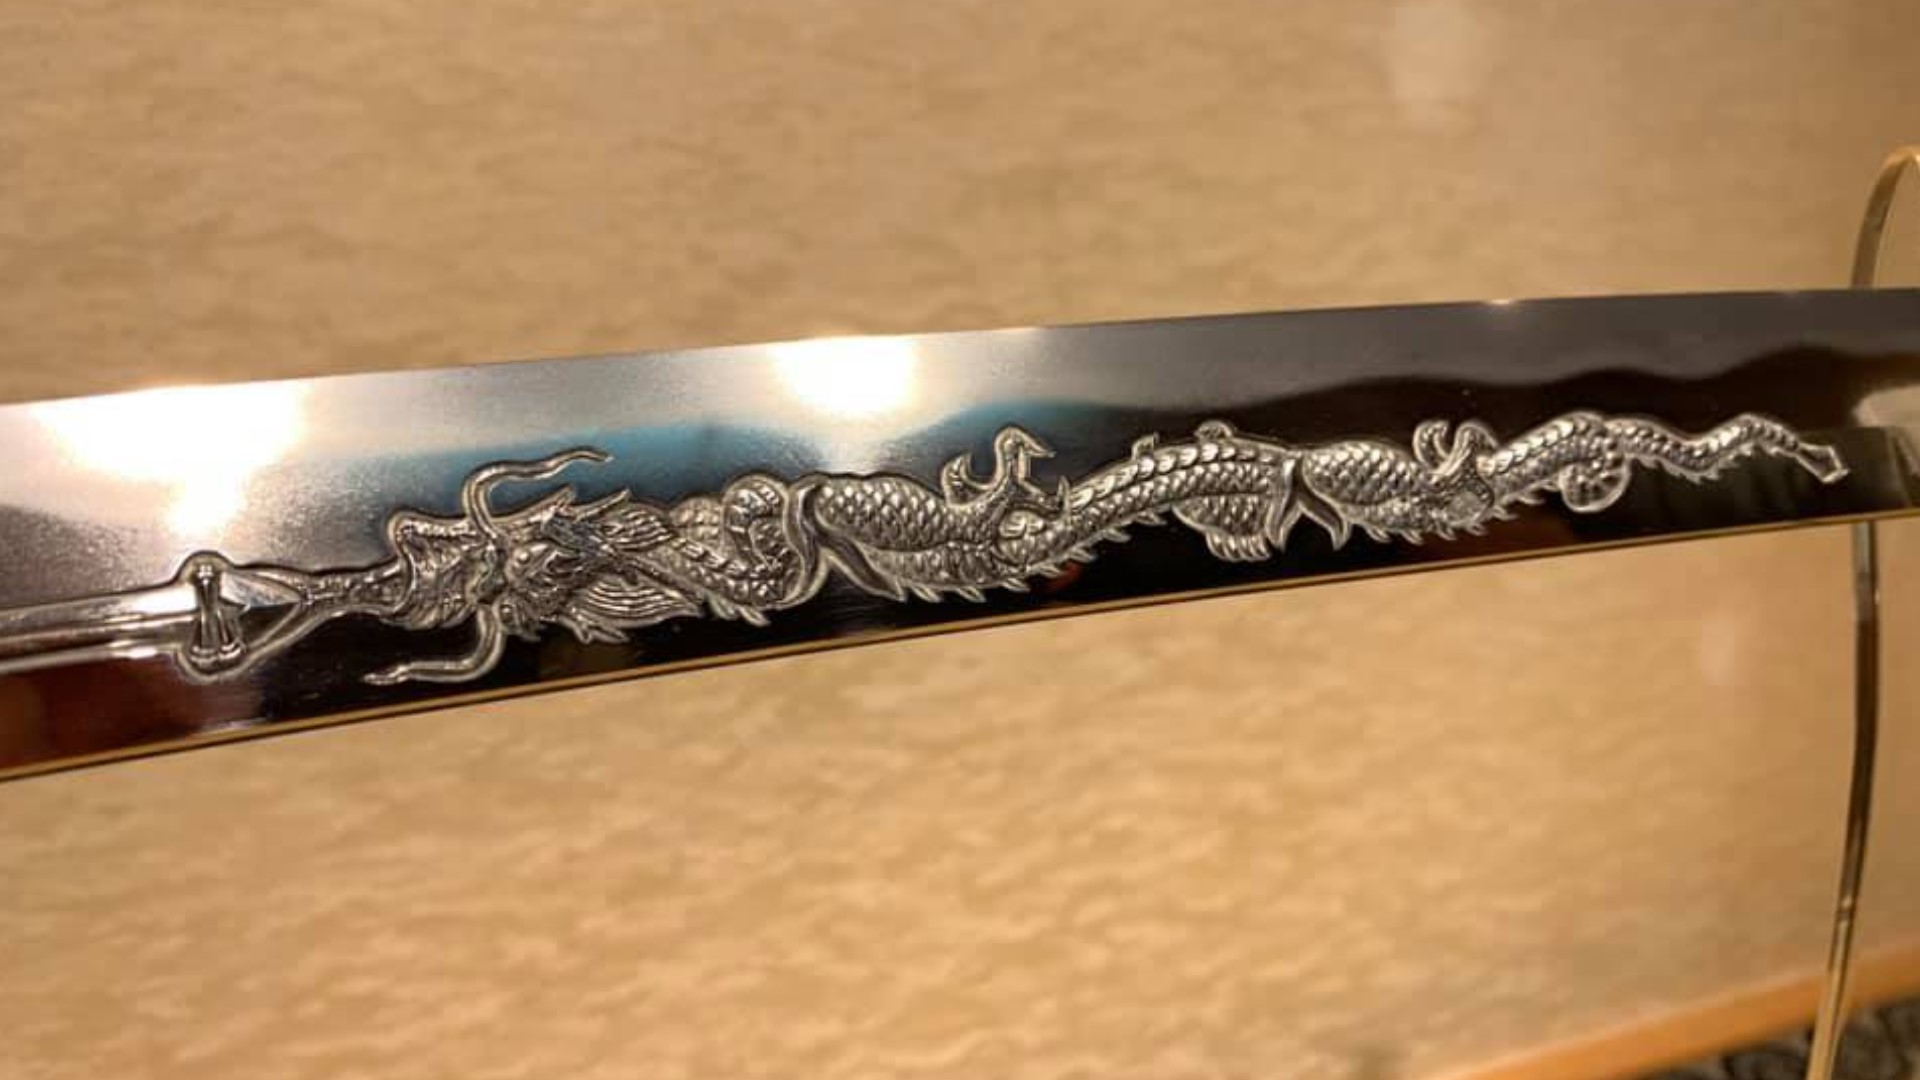 Gassan Sadatoshi's family still carries the passion to create the perfect blade, as it has been for hundreds of years in Nara, Japan.